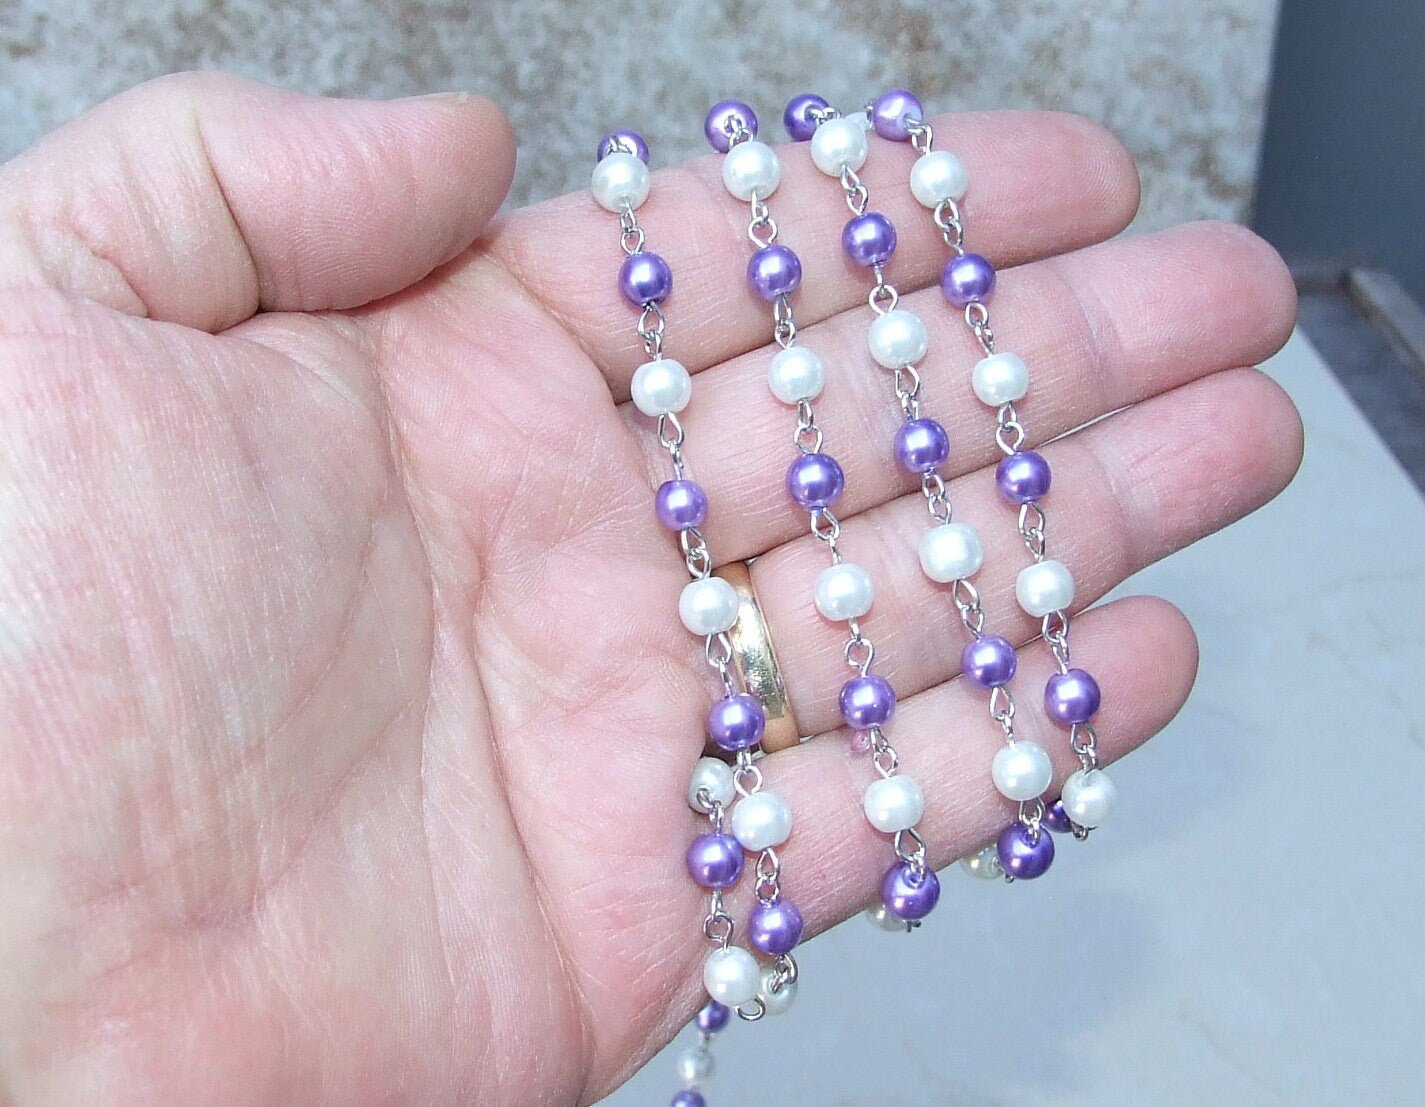 White & Purple Pearl Rosary Chain, 1 Meter, Glass Beads, Beaded Chain, Body Chain Jewelry, Silver Chain, Necklace Chain, Belly Chain, 6mm206